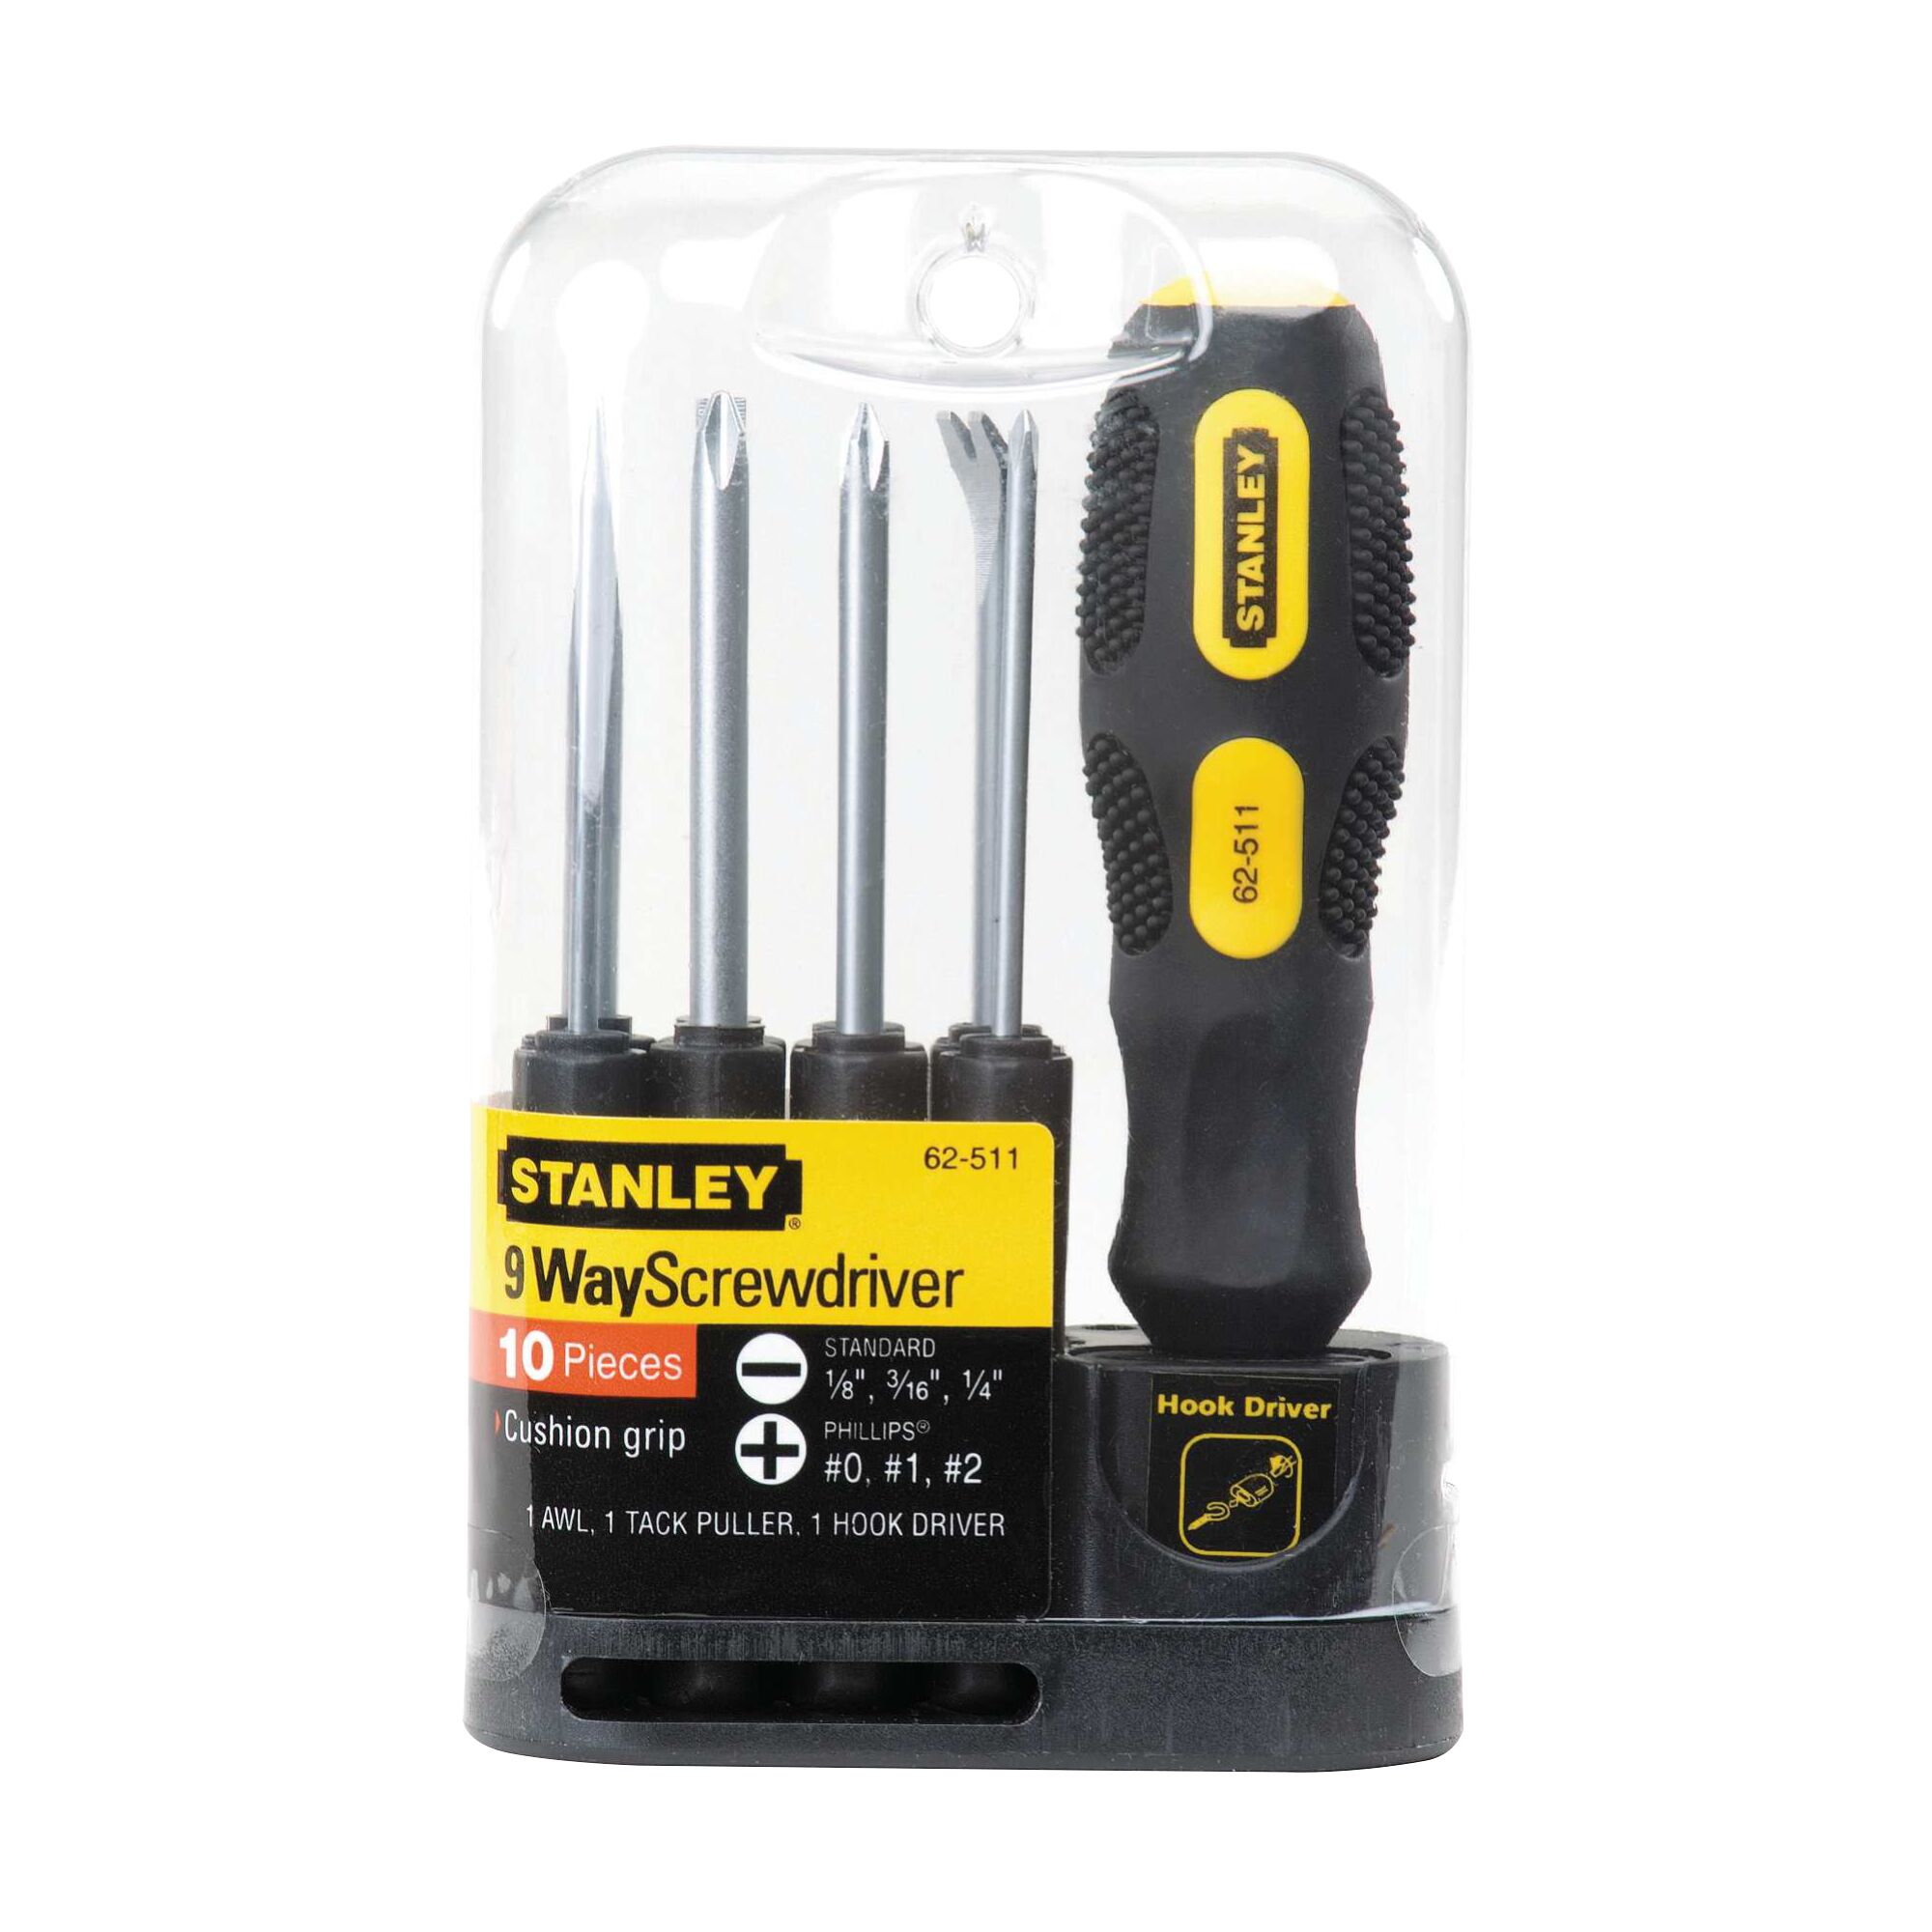 NEW STANLEY 62-511 9 PIECE SCREWDRIVER KIT FREE SHIPPING 